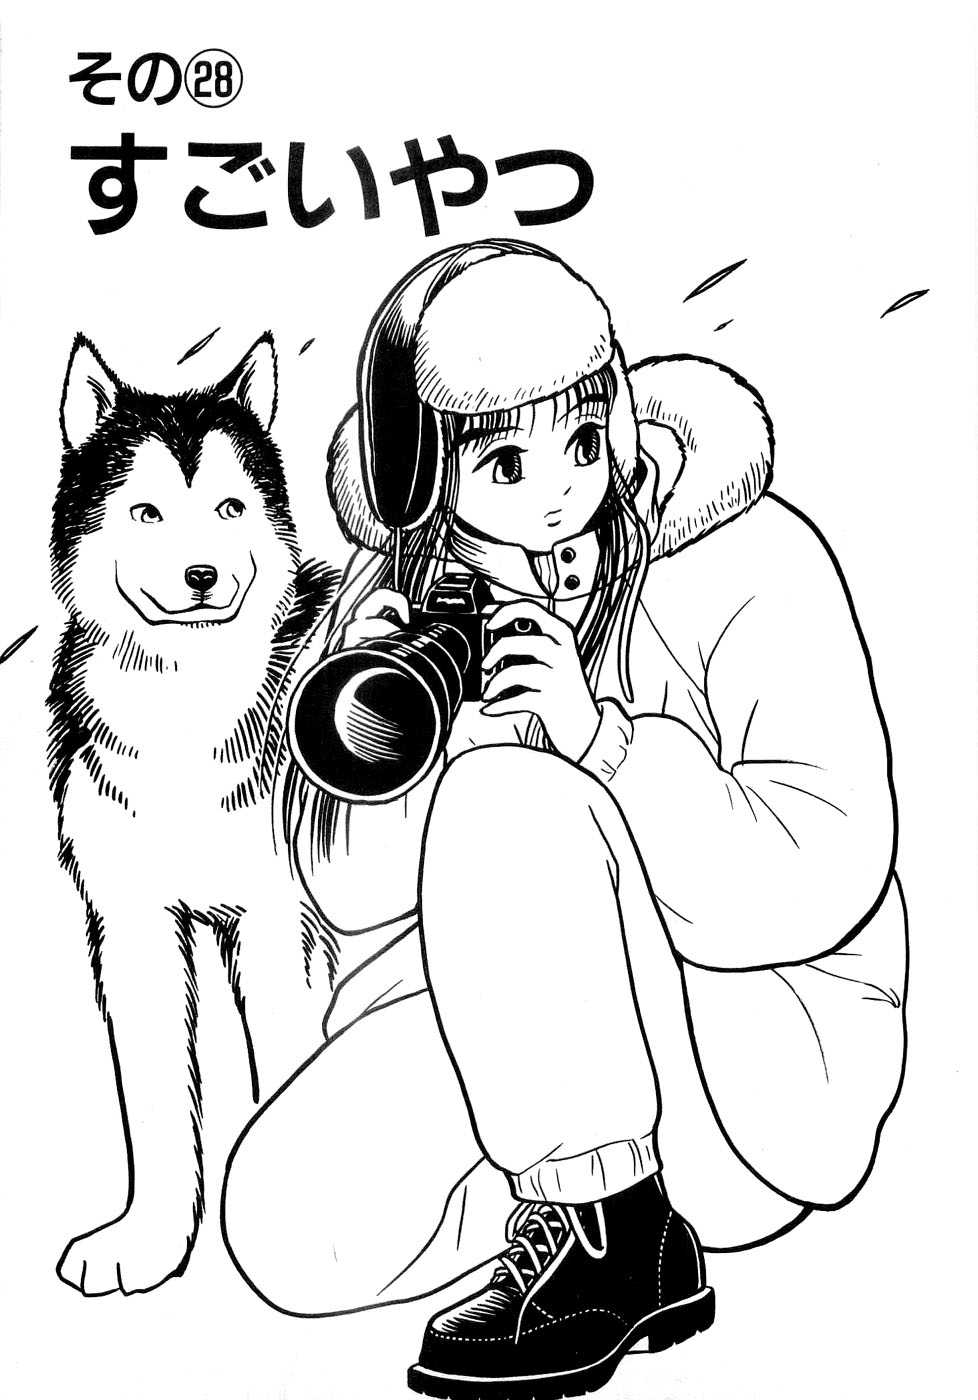 Inu (いぬ) 3 